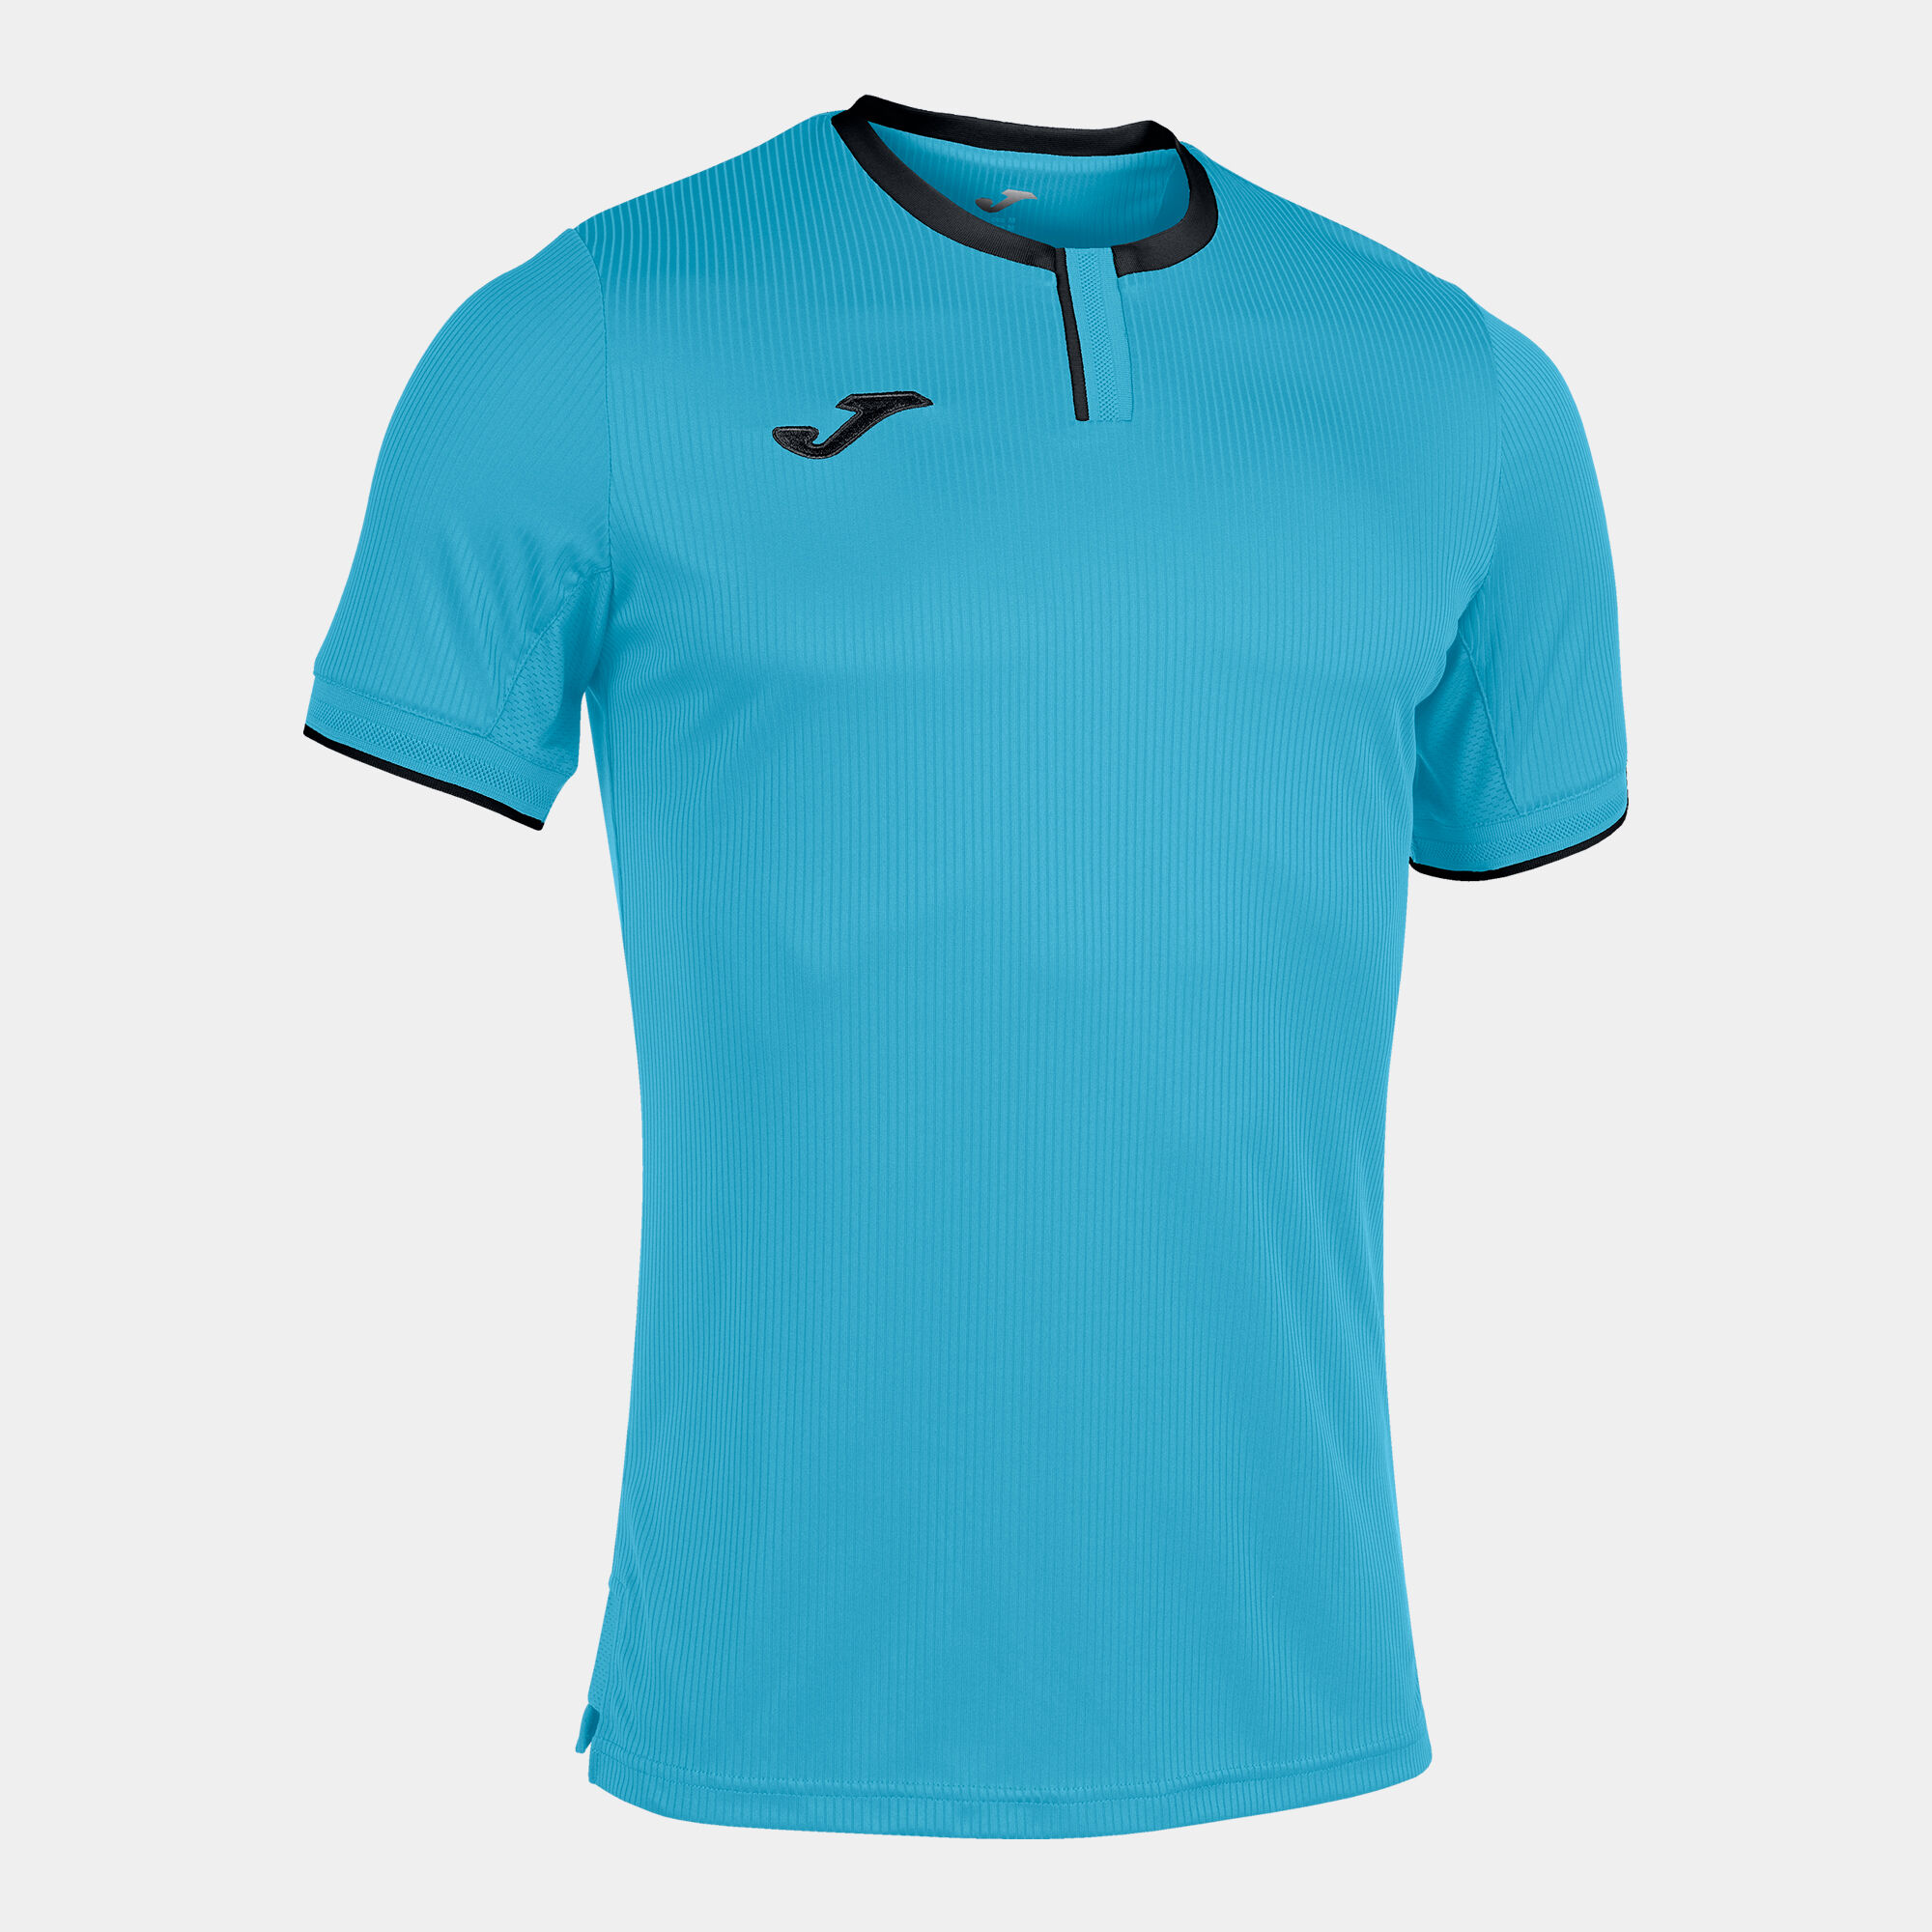 MAILLOT MANCHES COURTES HOMME GOLD III TURQUOISE FLUO NOIR